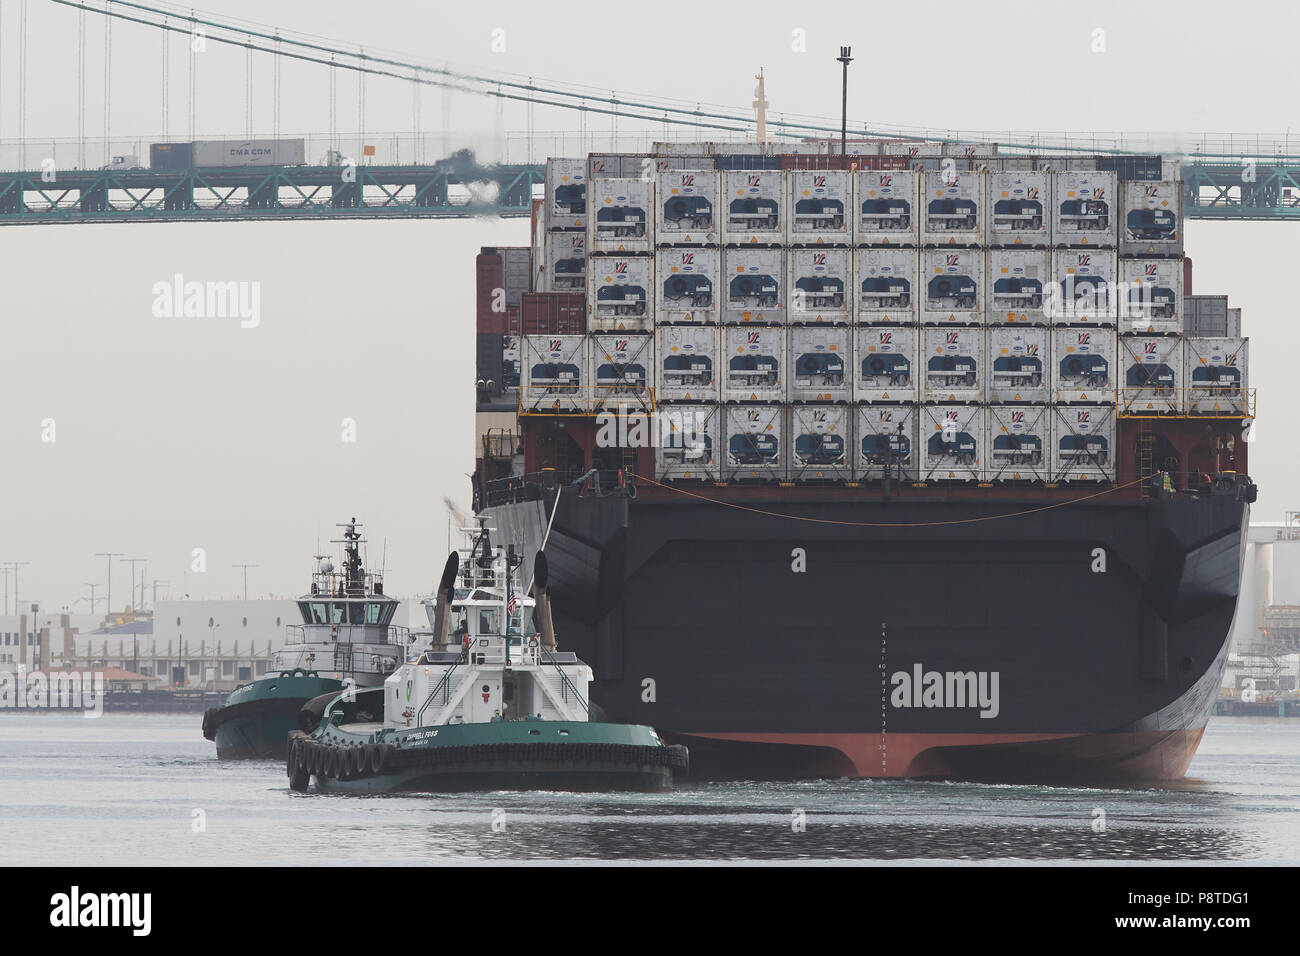 Reefer Containers On The Stern Of The Vintage PASHA HAWAII, Container Ship, HORIZON RELIENCE, In The Los Angeles Main Channel, San Pedro, California. Stock Photo